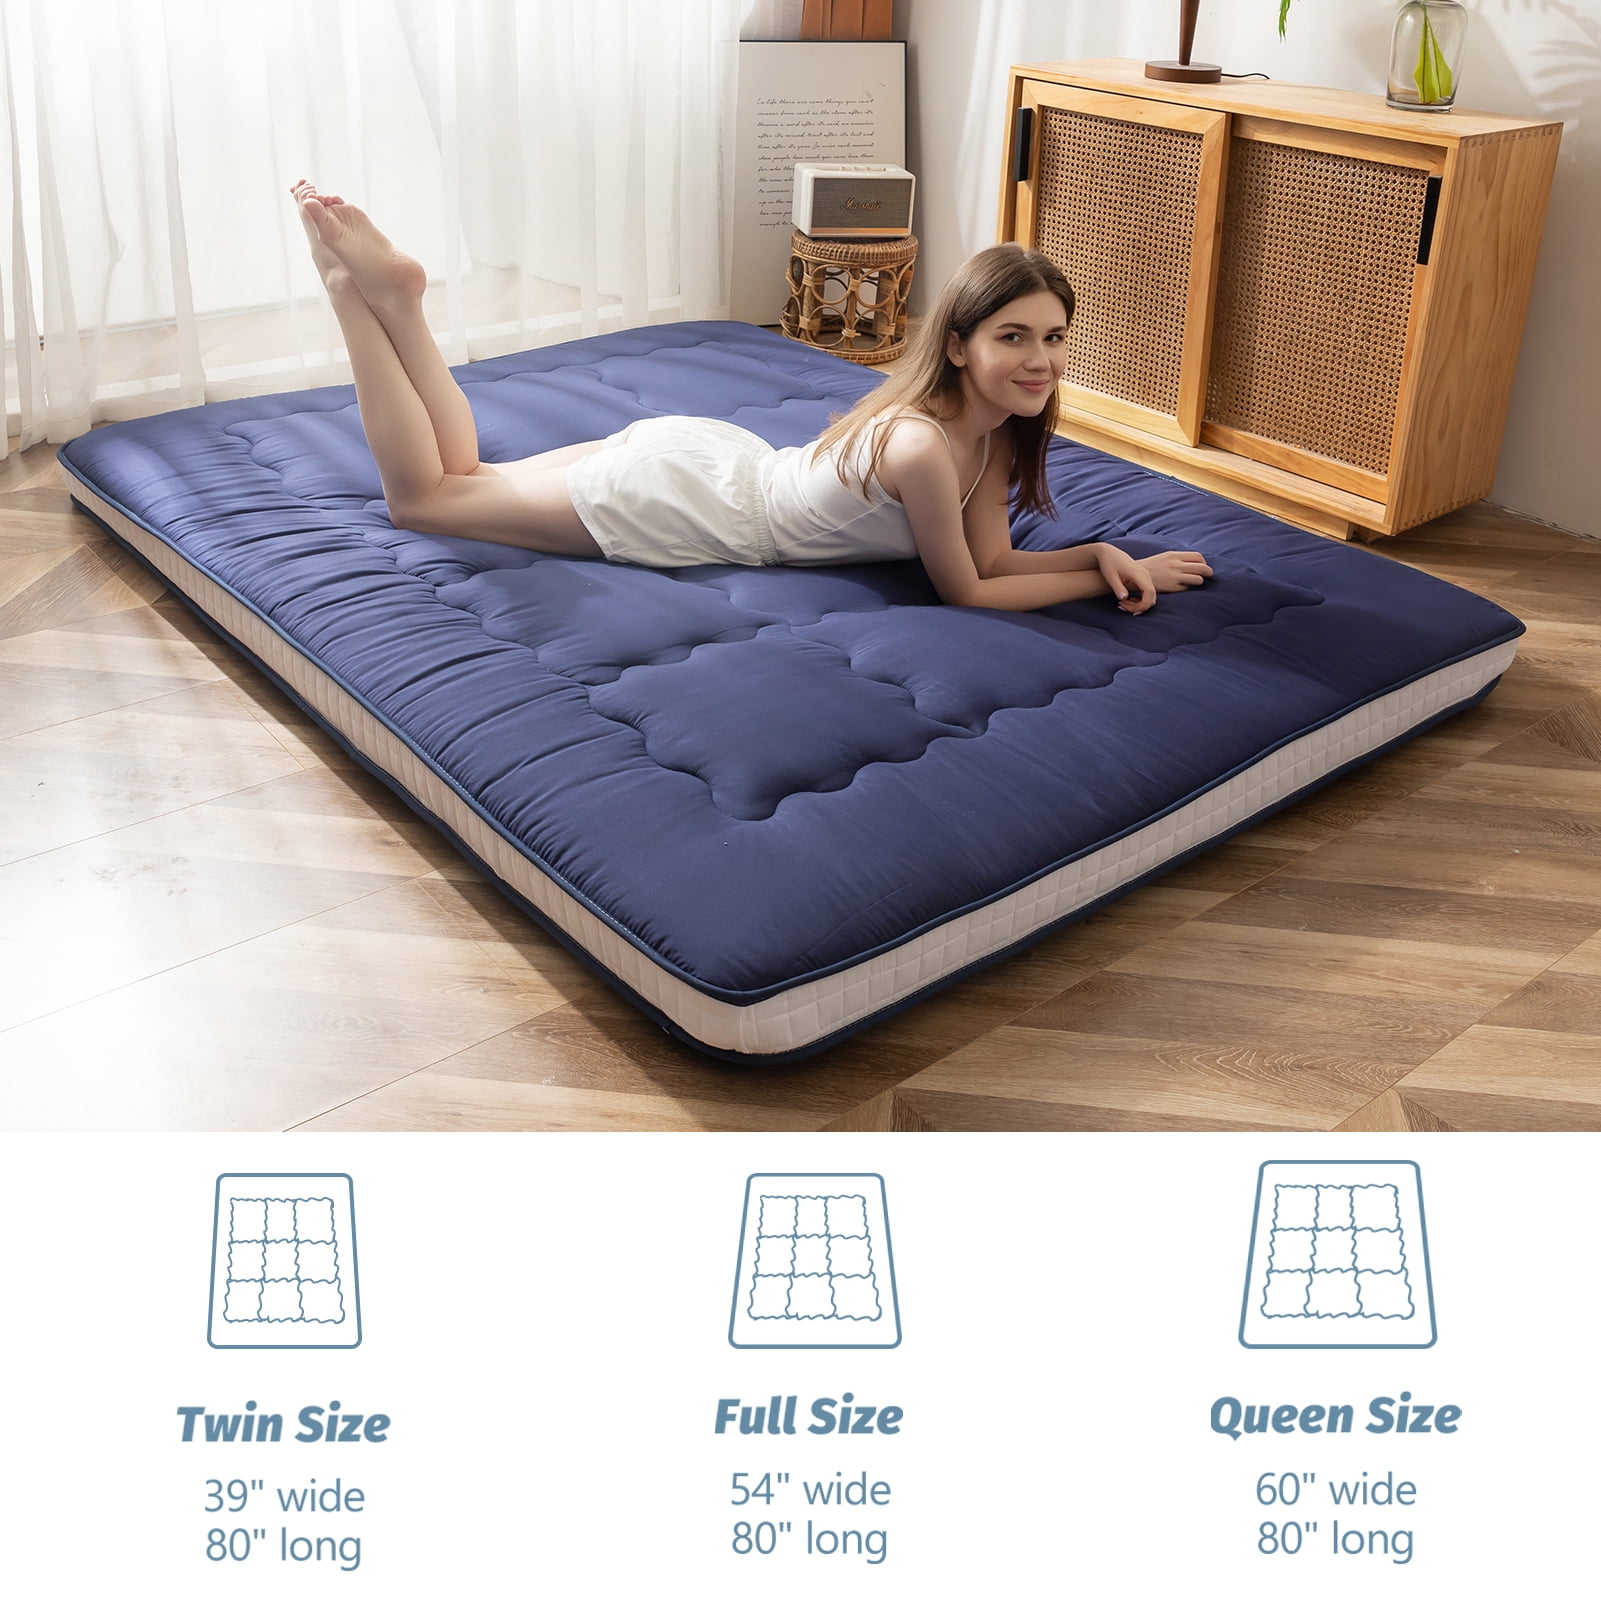 Traditional Floor Mattress, Japanese Futon Mattress for Adults, Rolling Up  Sleeping Mattress Tatami Mat for Guest Room Dormitory Bedroom,Navy,Full